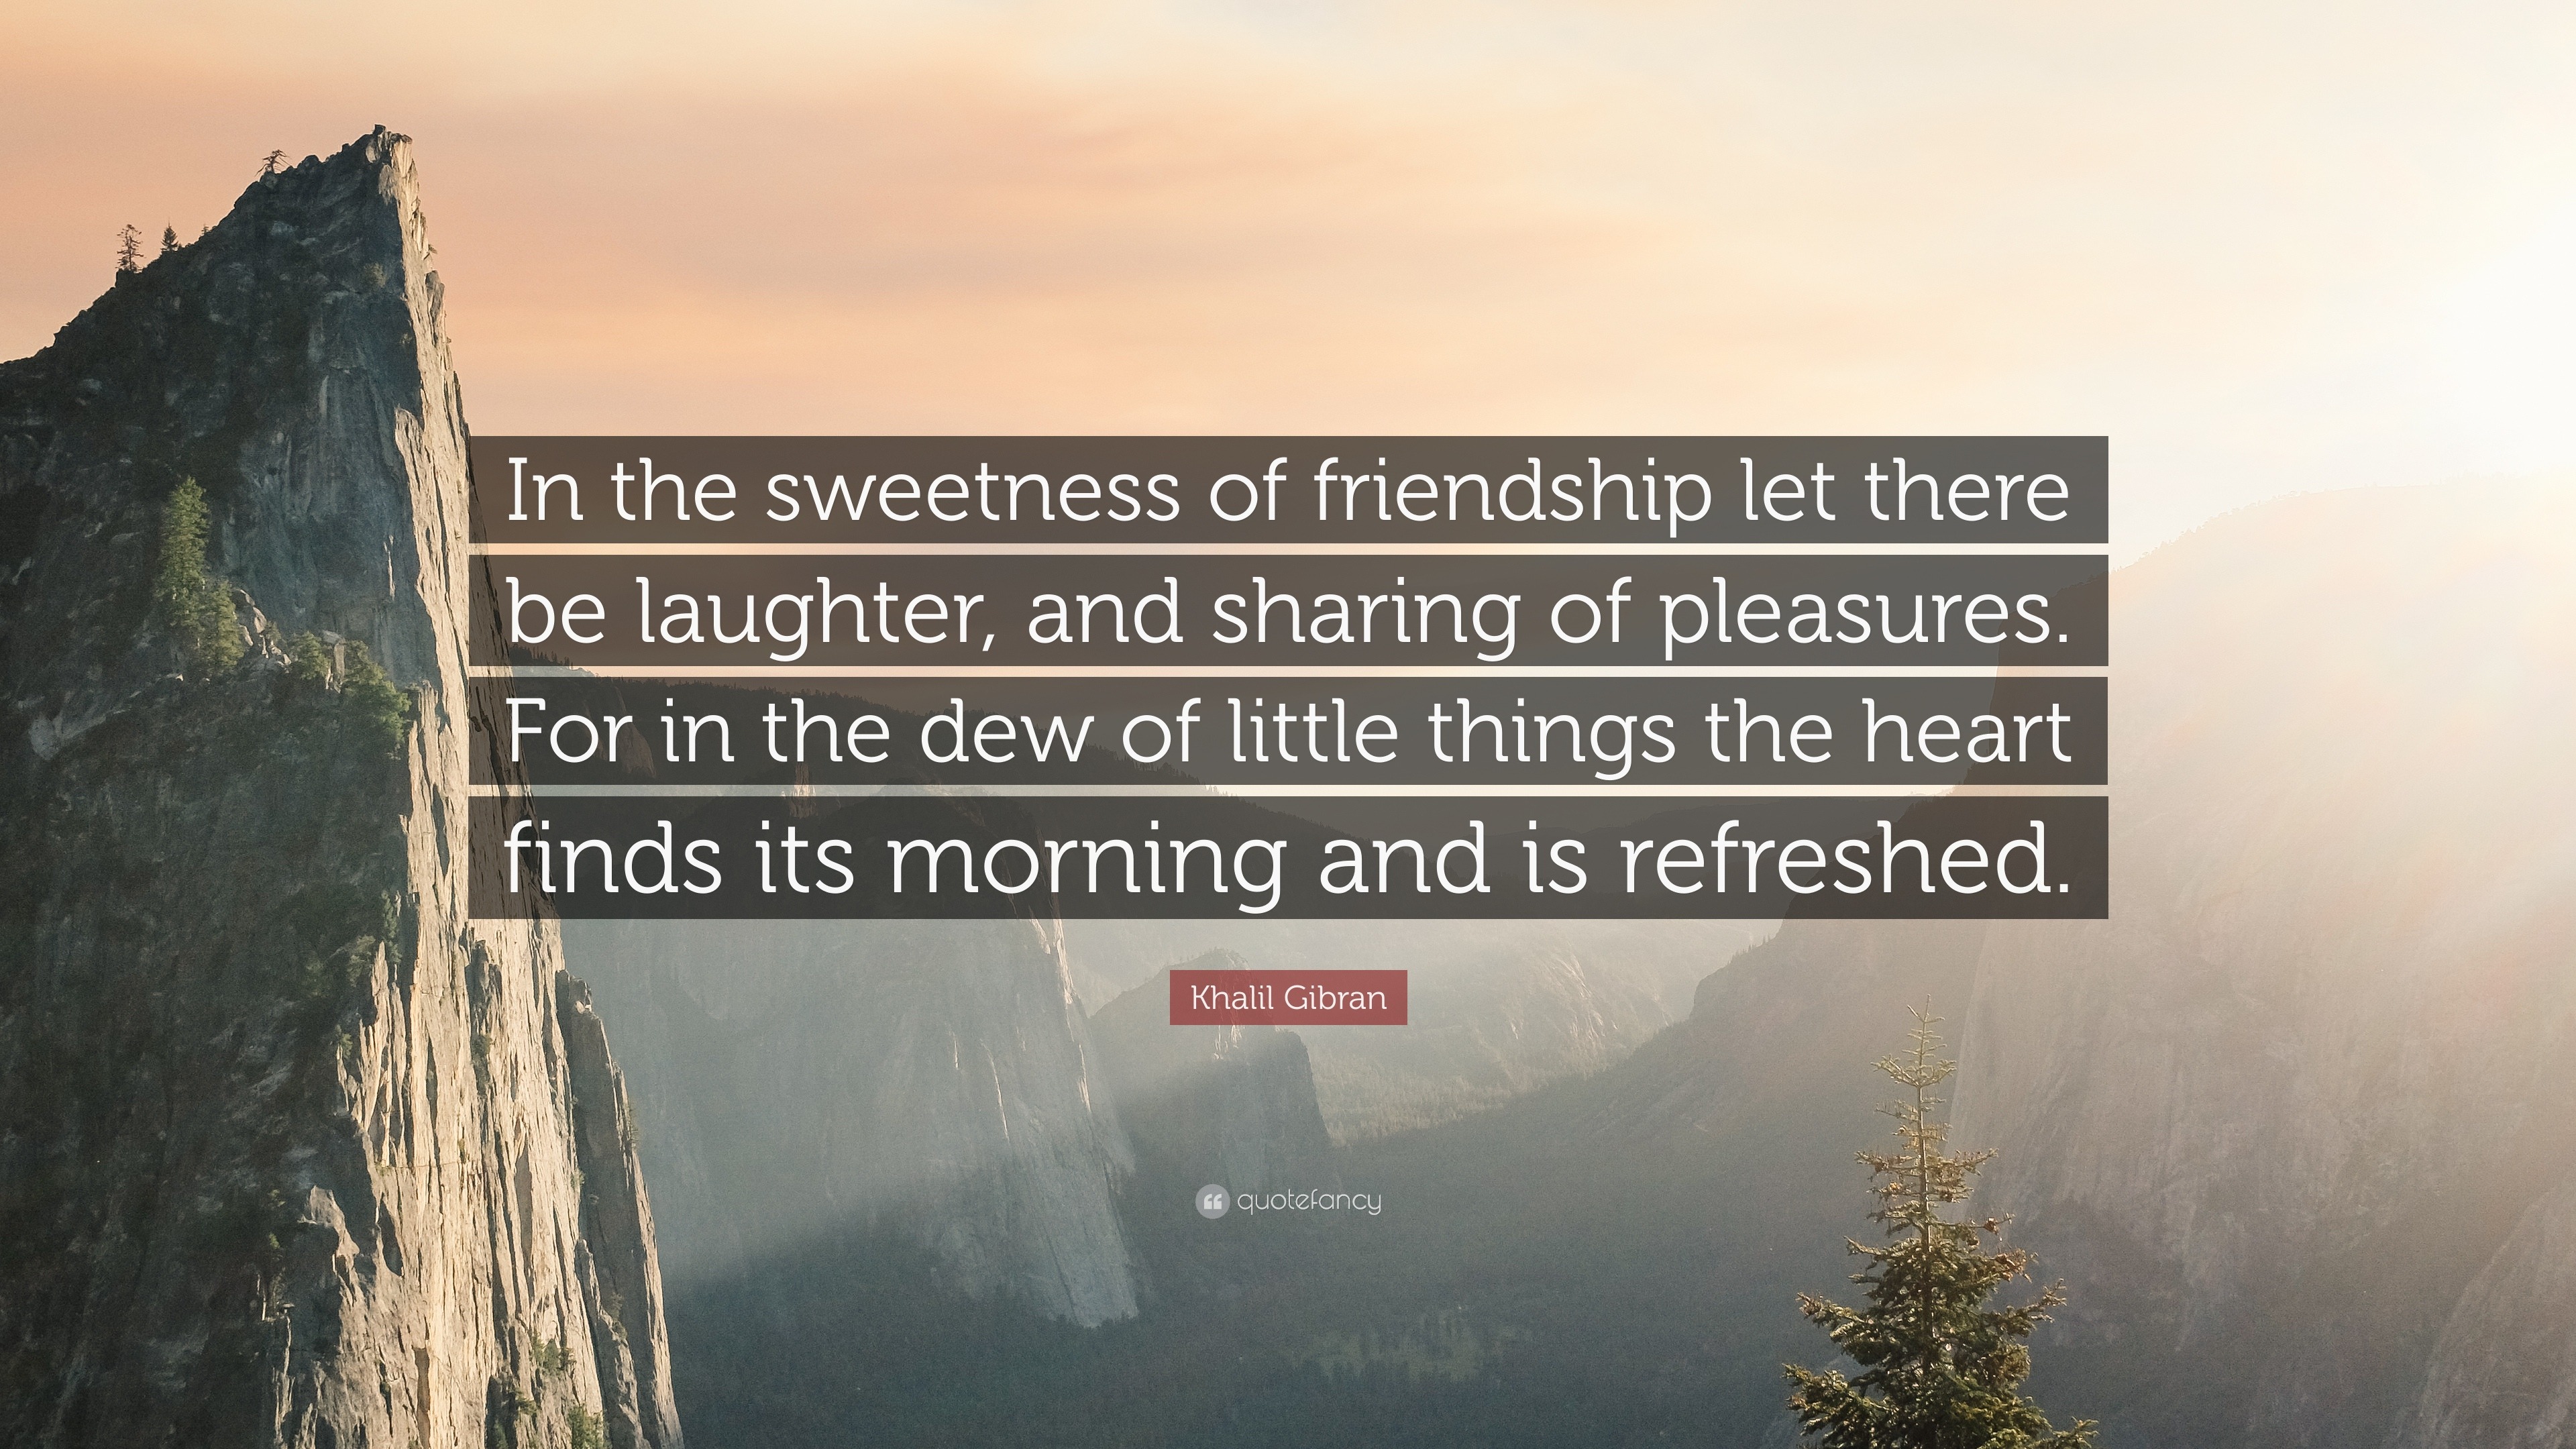 Good Morning Quotes “In the sweetness of friendship let there be laughter and